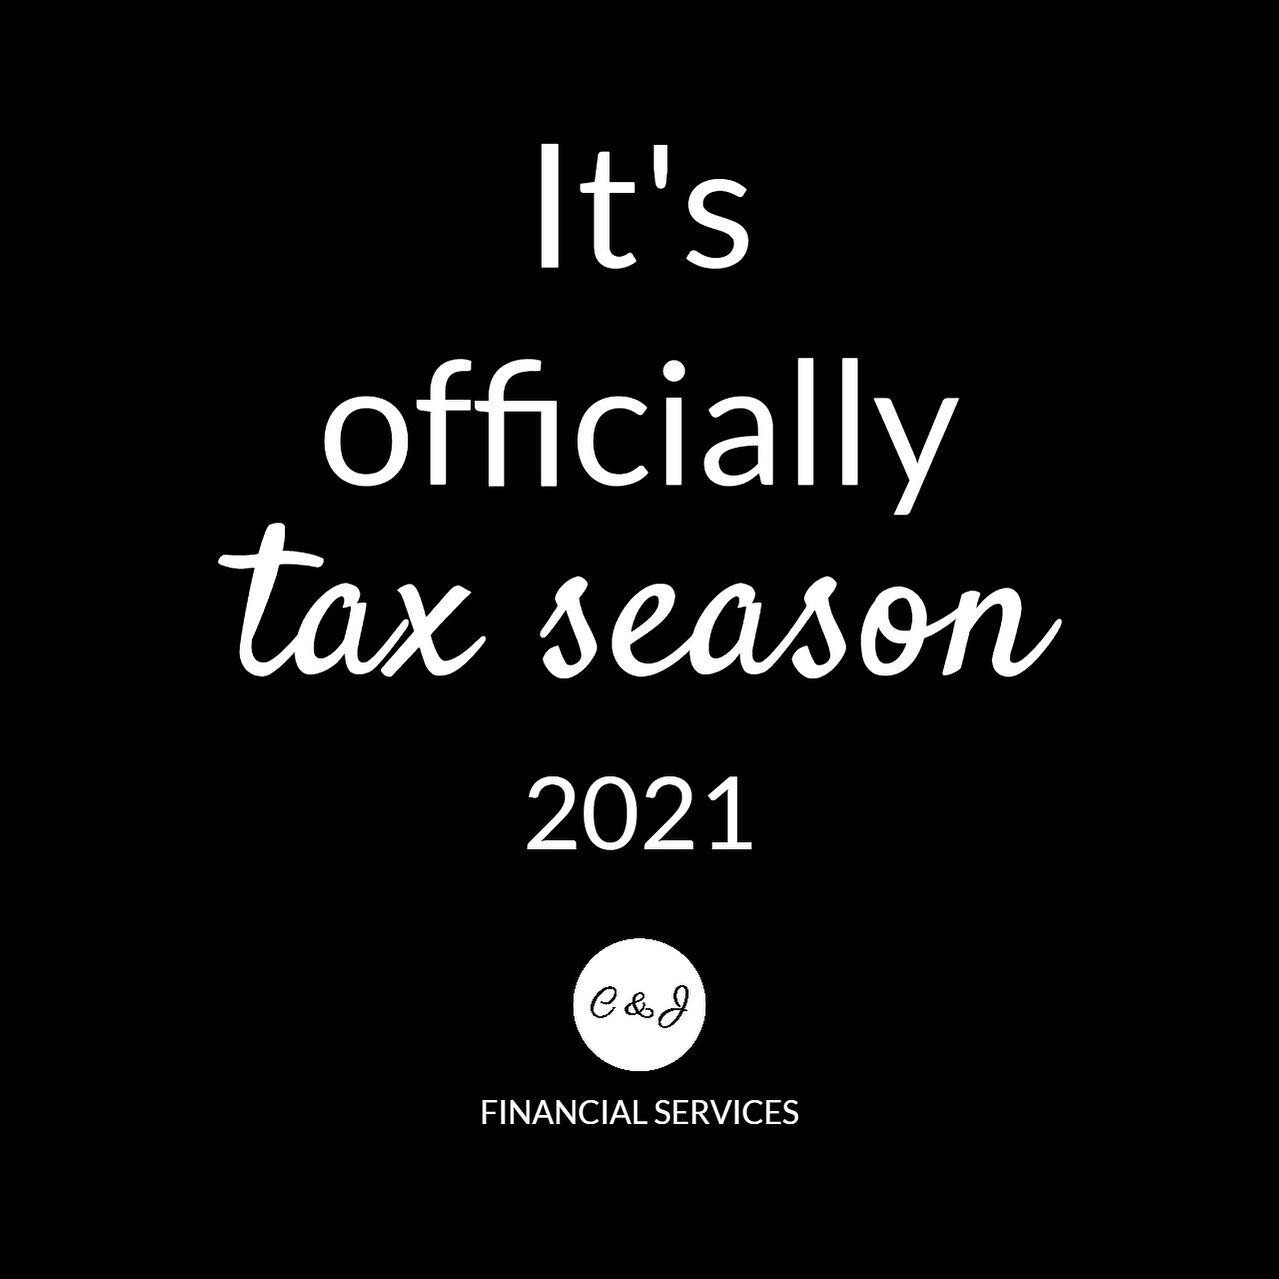 It&rsquo;s officially tax season! Meaning it&rsquo;s time to work our &ldquo;assets&rdquo; off!
﻿
﻿Aside from handling ordinary year-end closing tasks (like issuing W-2&rsquo;s and 1099&rsquo;s, filing annual general excise tax forms, preparing workp